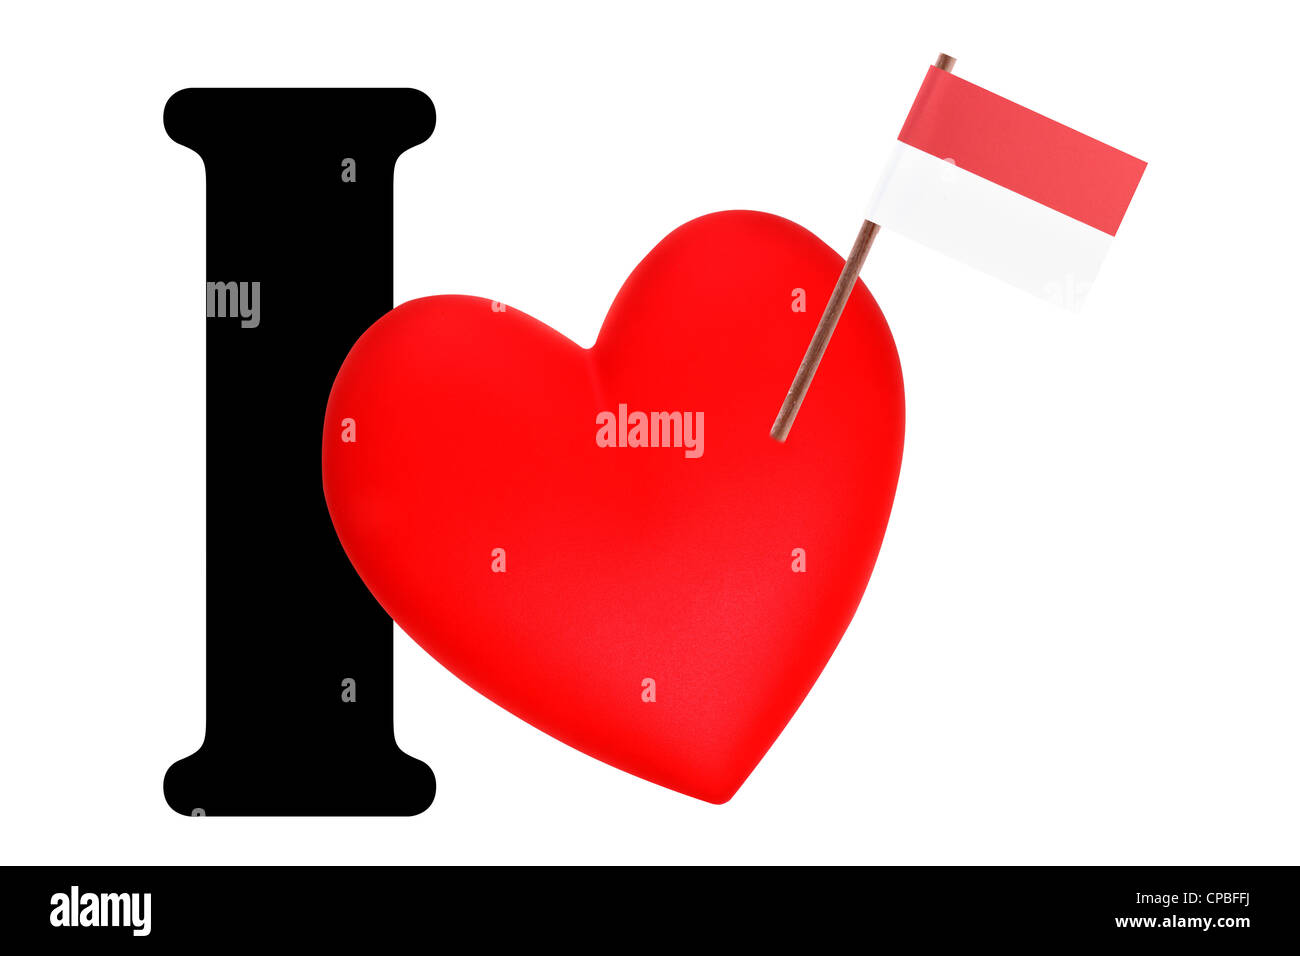 Small flag on a red heart and the word I to express love for the national flag of Indonesia Stock Photo